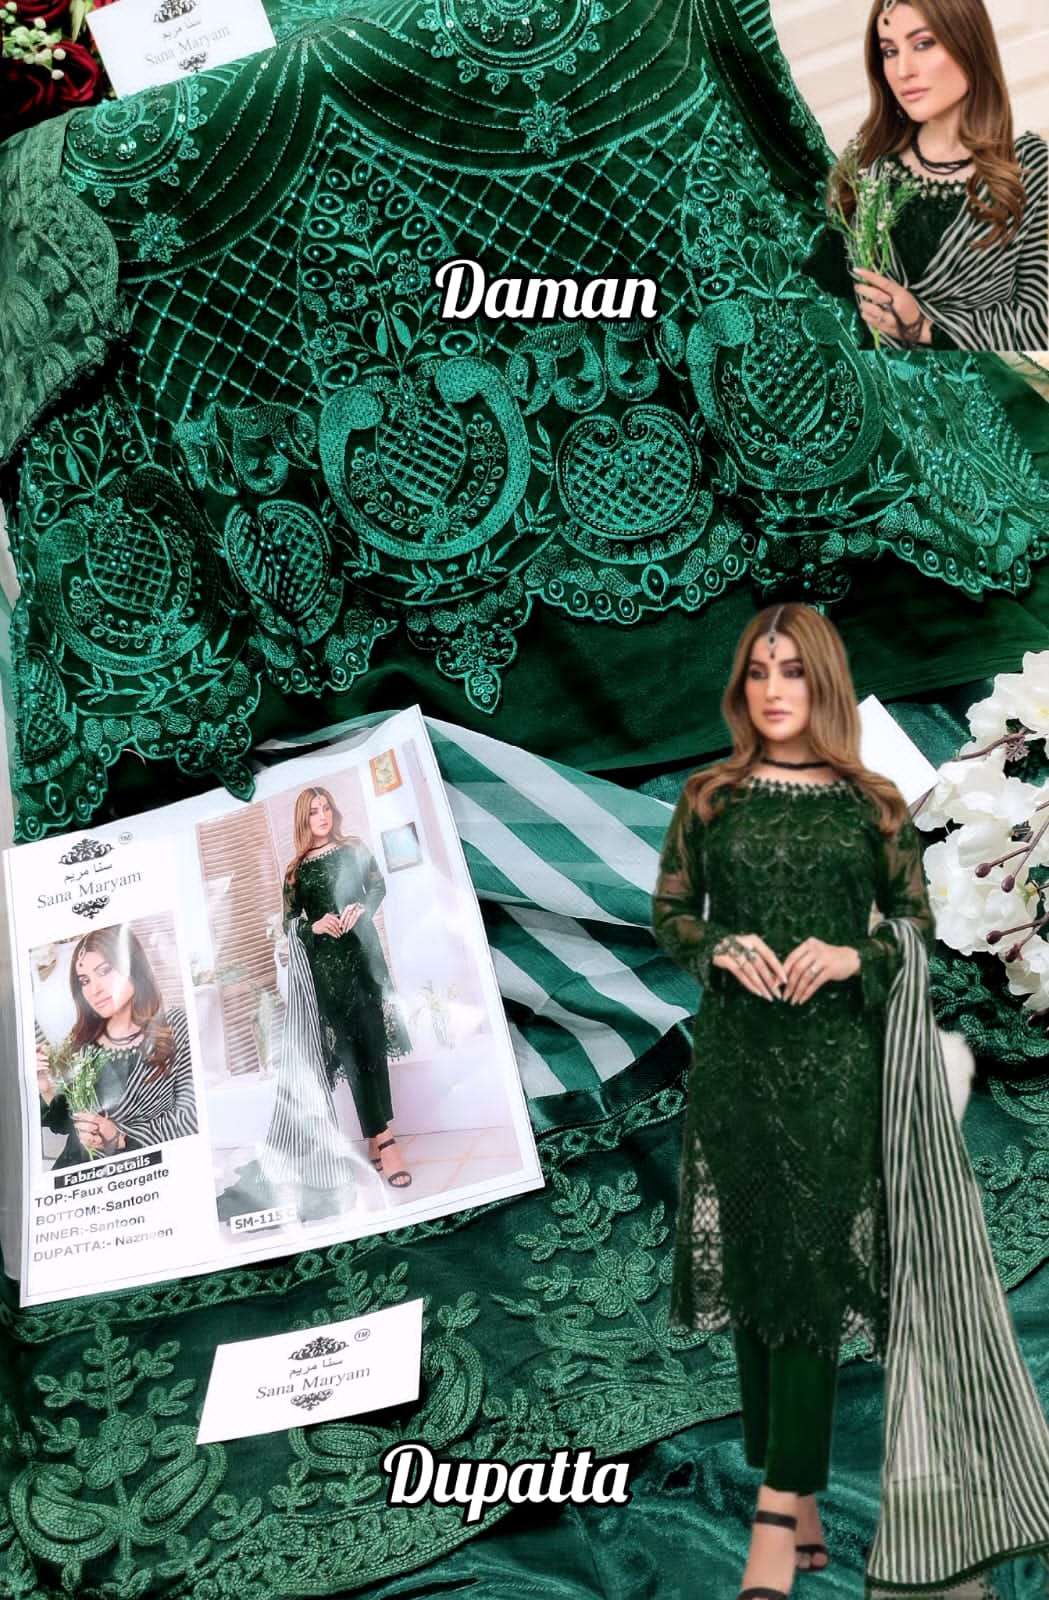 SM-115 COLOURS BY SANA MARYAM 115-A TO 115-C SERIES BEAUTIFUL PAKISTANI SUITS STYLISH FANCY COLORFUL PARTY WEAR & OCCASIONAL WEAR FAUX GEORGETTE WITH EMBROIDERY DRESSES AT WHOLESALE PRICE